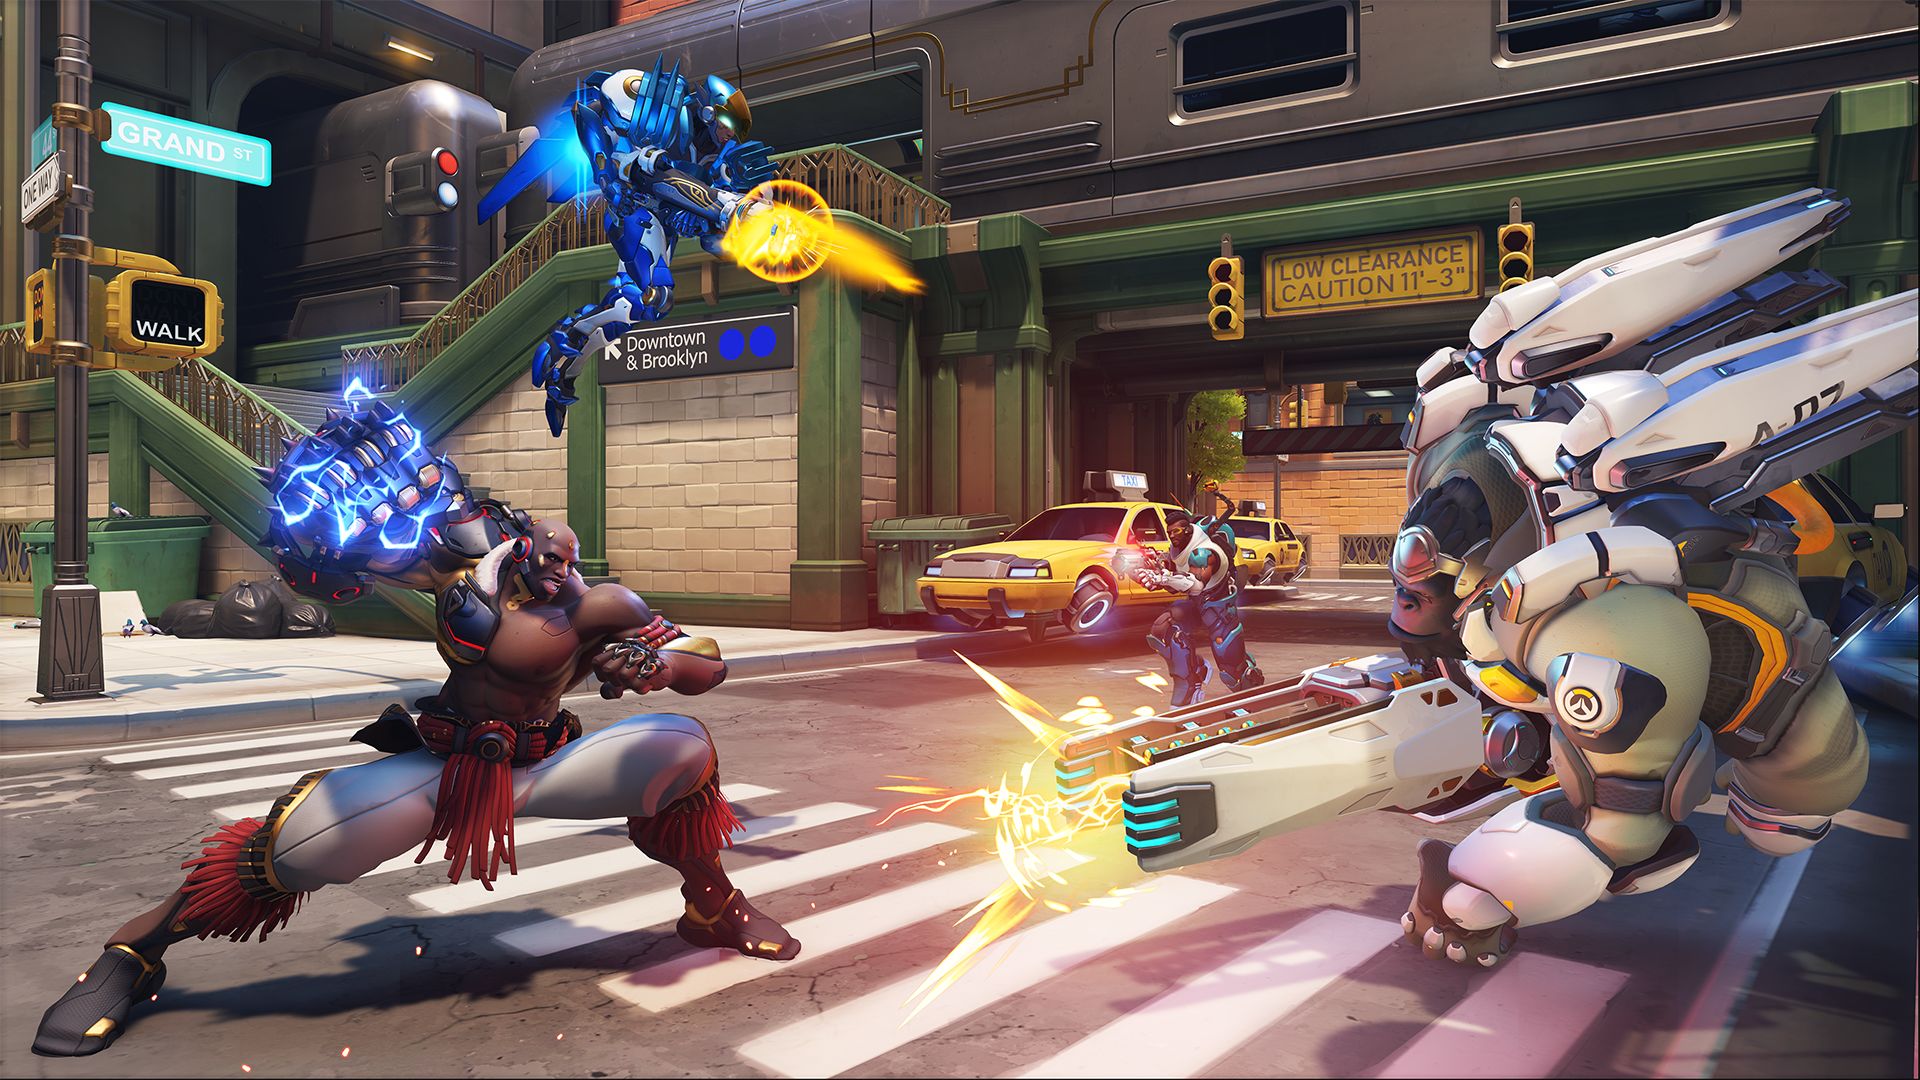 The latest Blizzard game dropped and gamers try to learn how to transfer Overwatch skins to Overwatch 2 and question "Do Overwatch skins carry over to...